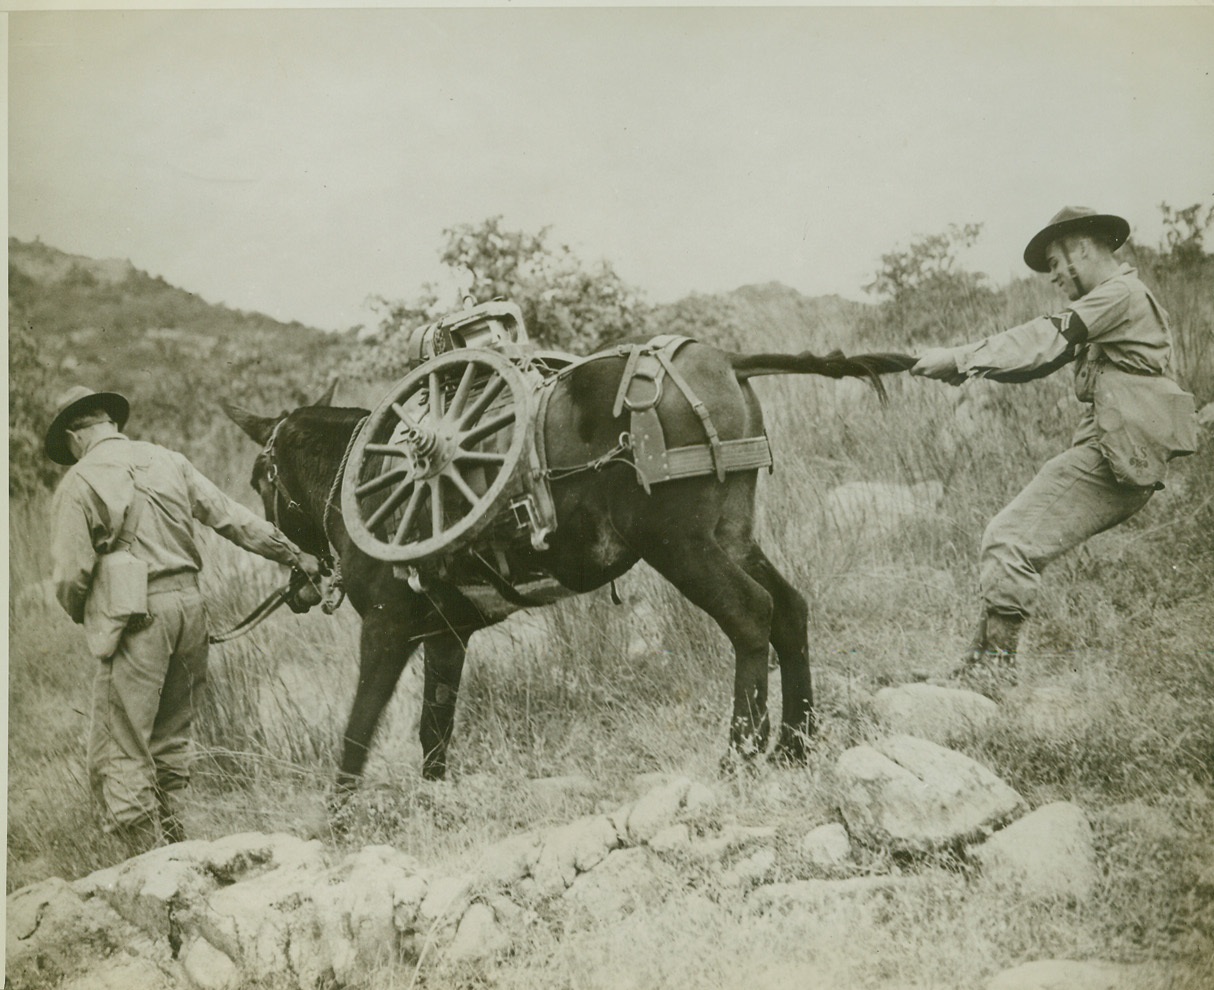 GO LONG MULE, 12/23/1942. FORT SILL, OKLAHOMA—Even in this man’s modernized Army, the famous Army mule is still turning soldier’s hair gray with its stubbornness. But so far, no substitute has been found that can surpass the mule for hauling equipment over mountain trails. Here, two artillerymen try to coax an army mule into movement. Credit: US Army photo via OWI Radiophoto from ACME;